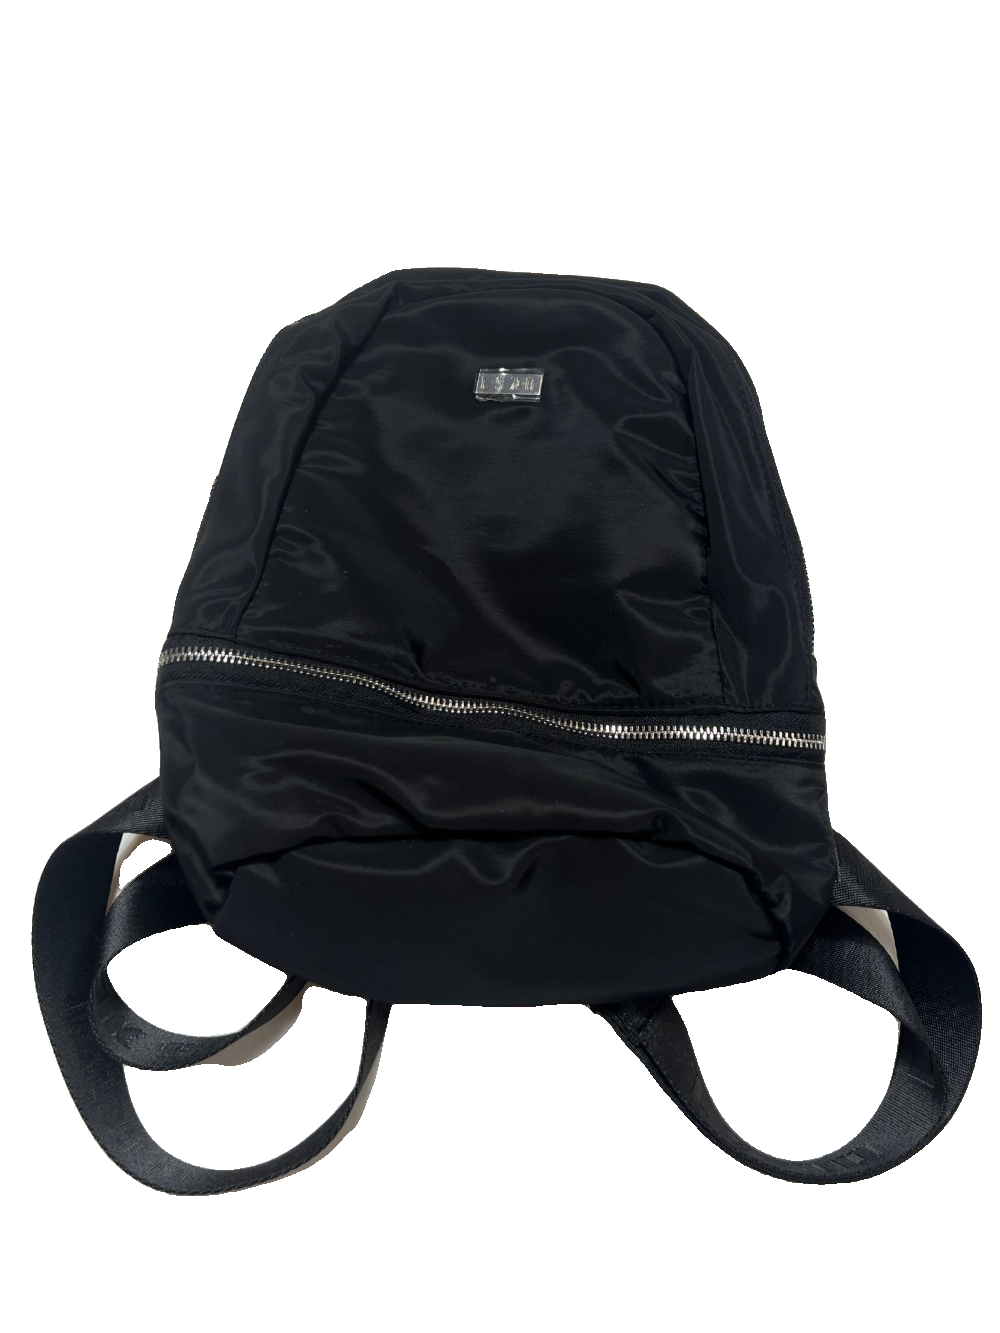 Lskd- Black Backpack NEW WITH TAGS!